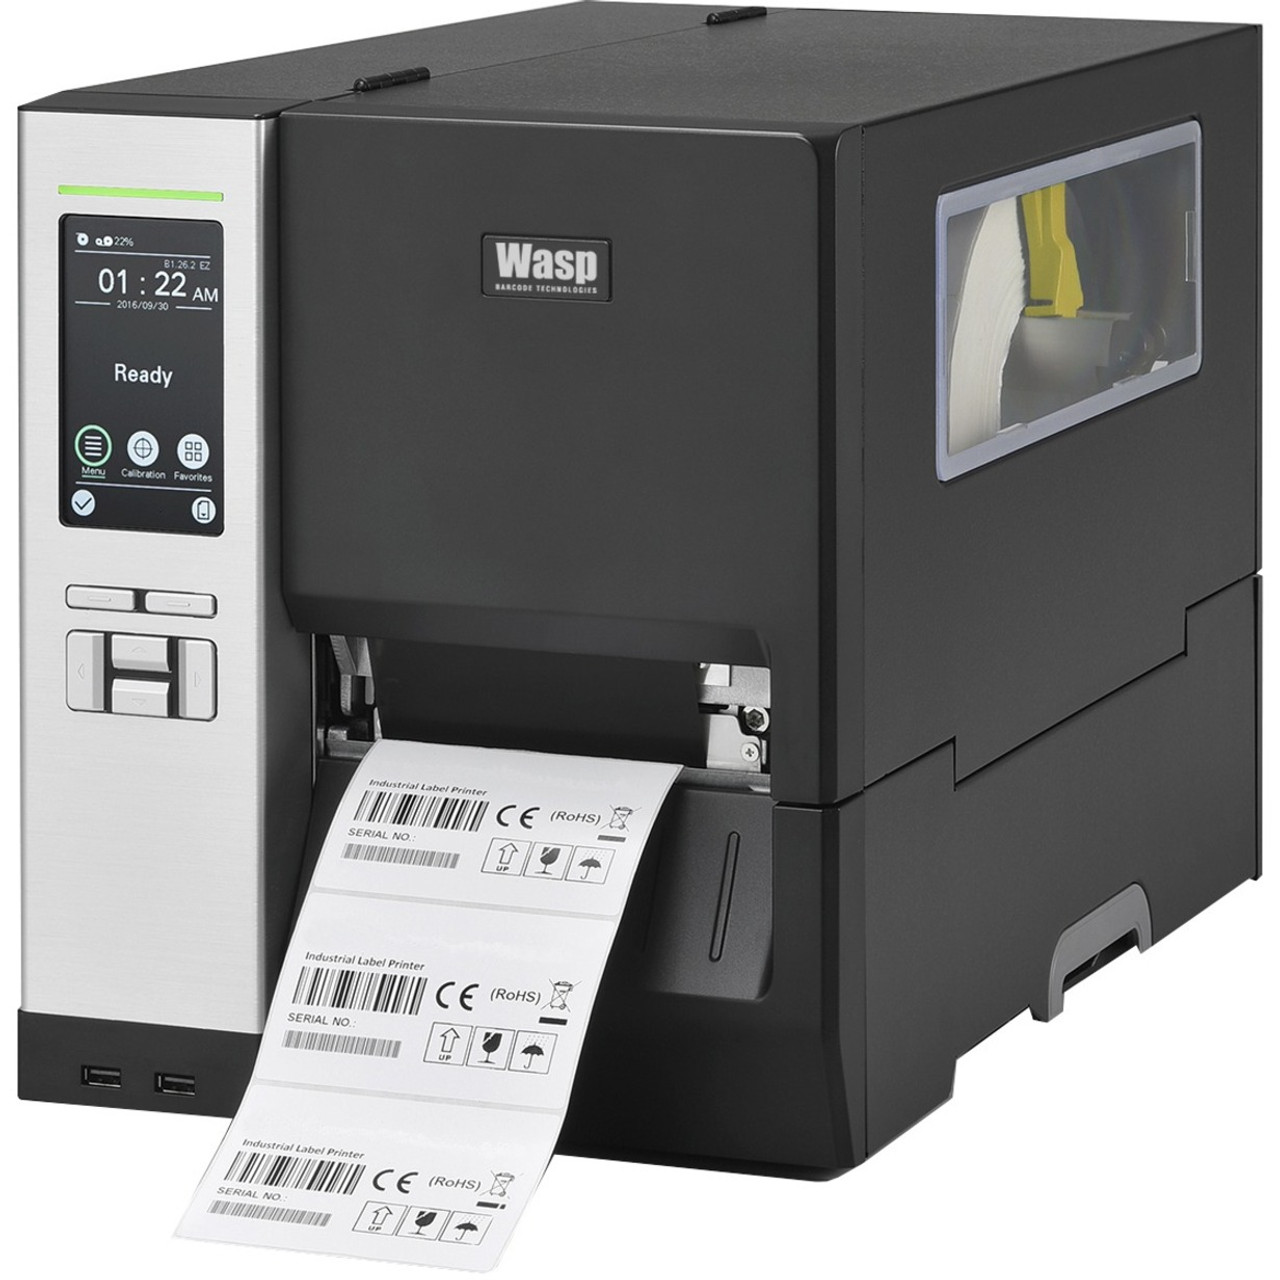 Wasp WPL614 Industrial Direct Thermal/Thermal Transfer Printer - Monochrome - Label Print - Ethernet - USB - Serial - 633809005718